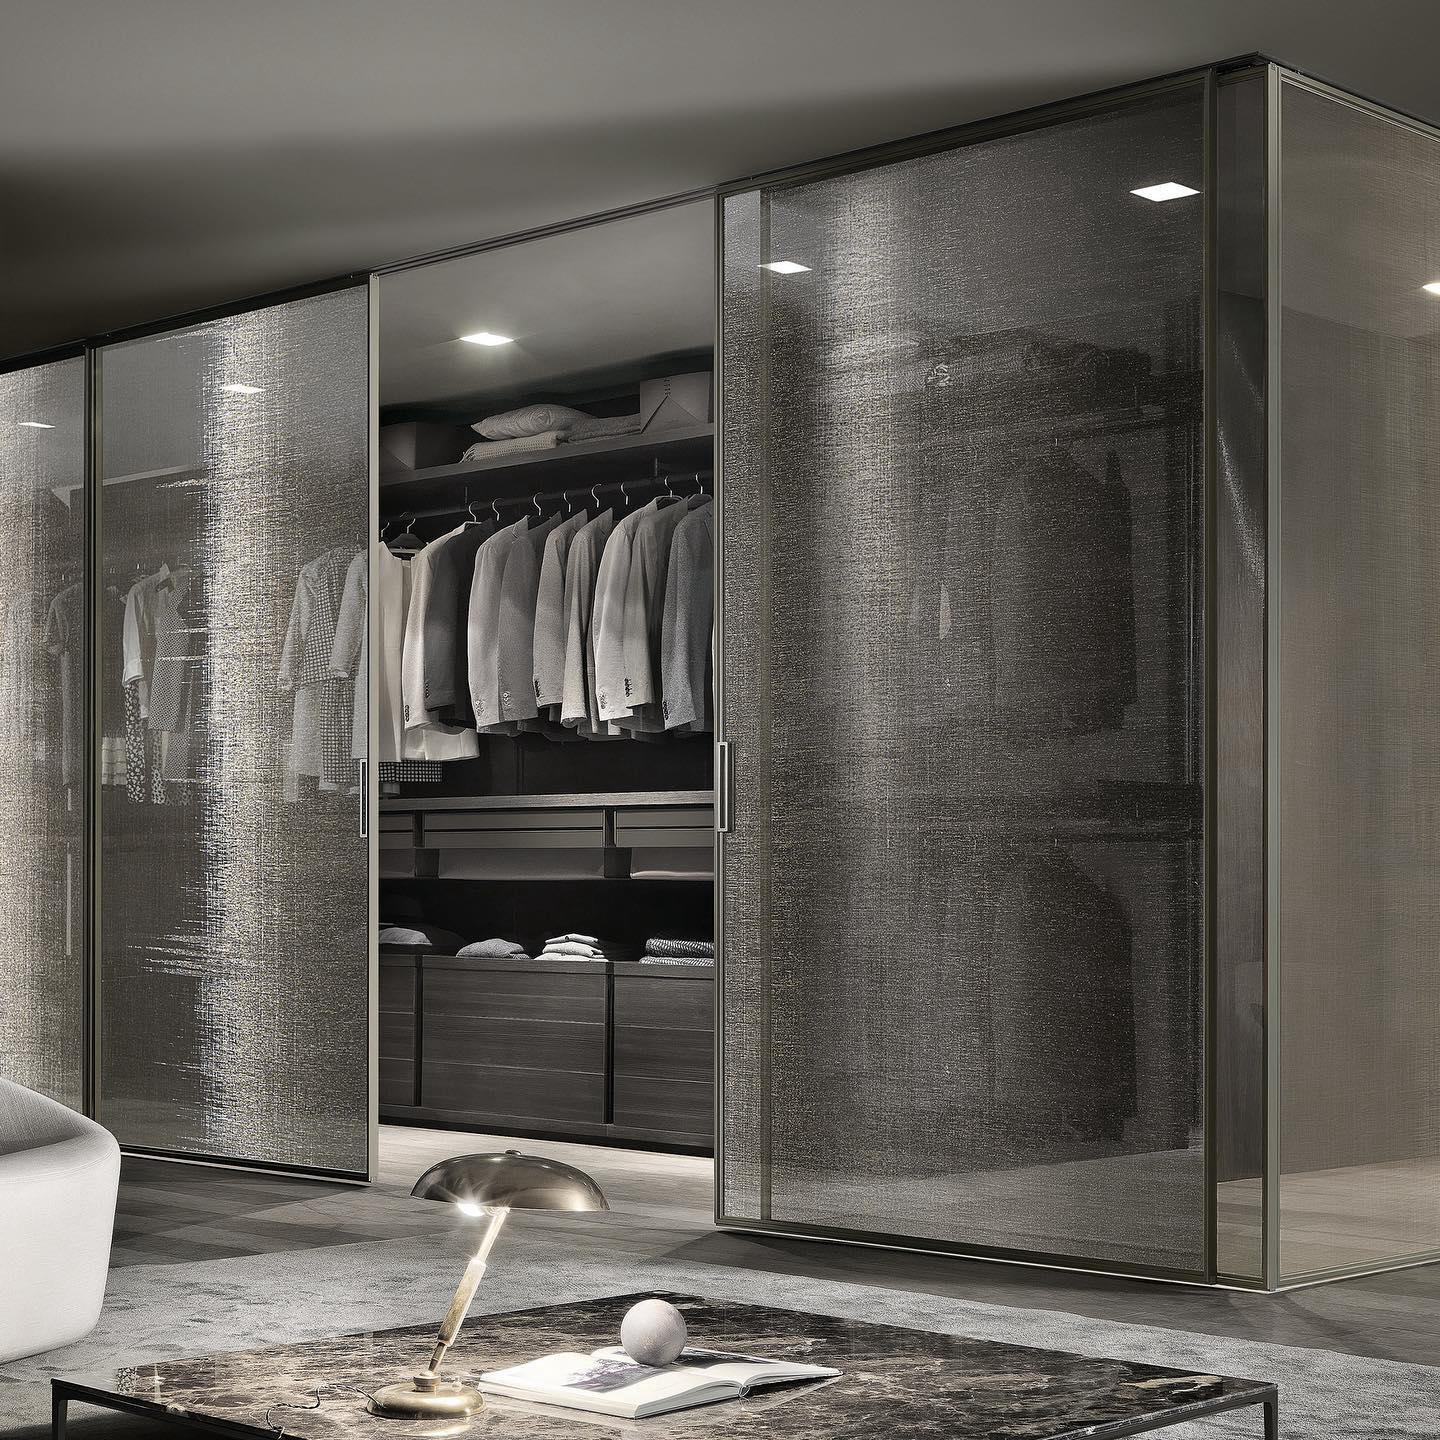 Pure Interiors - THE PERFECT WARDROBE ~ If you are looking for luxurious pieces to transform your ho